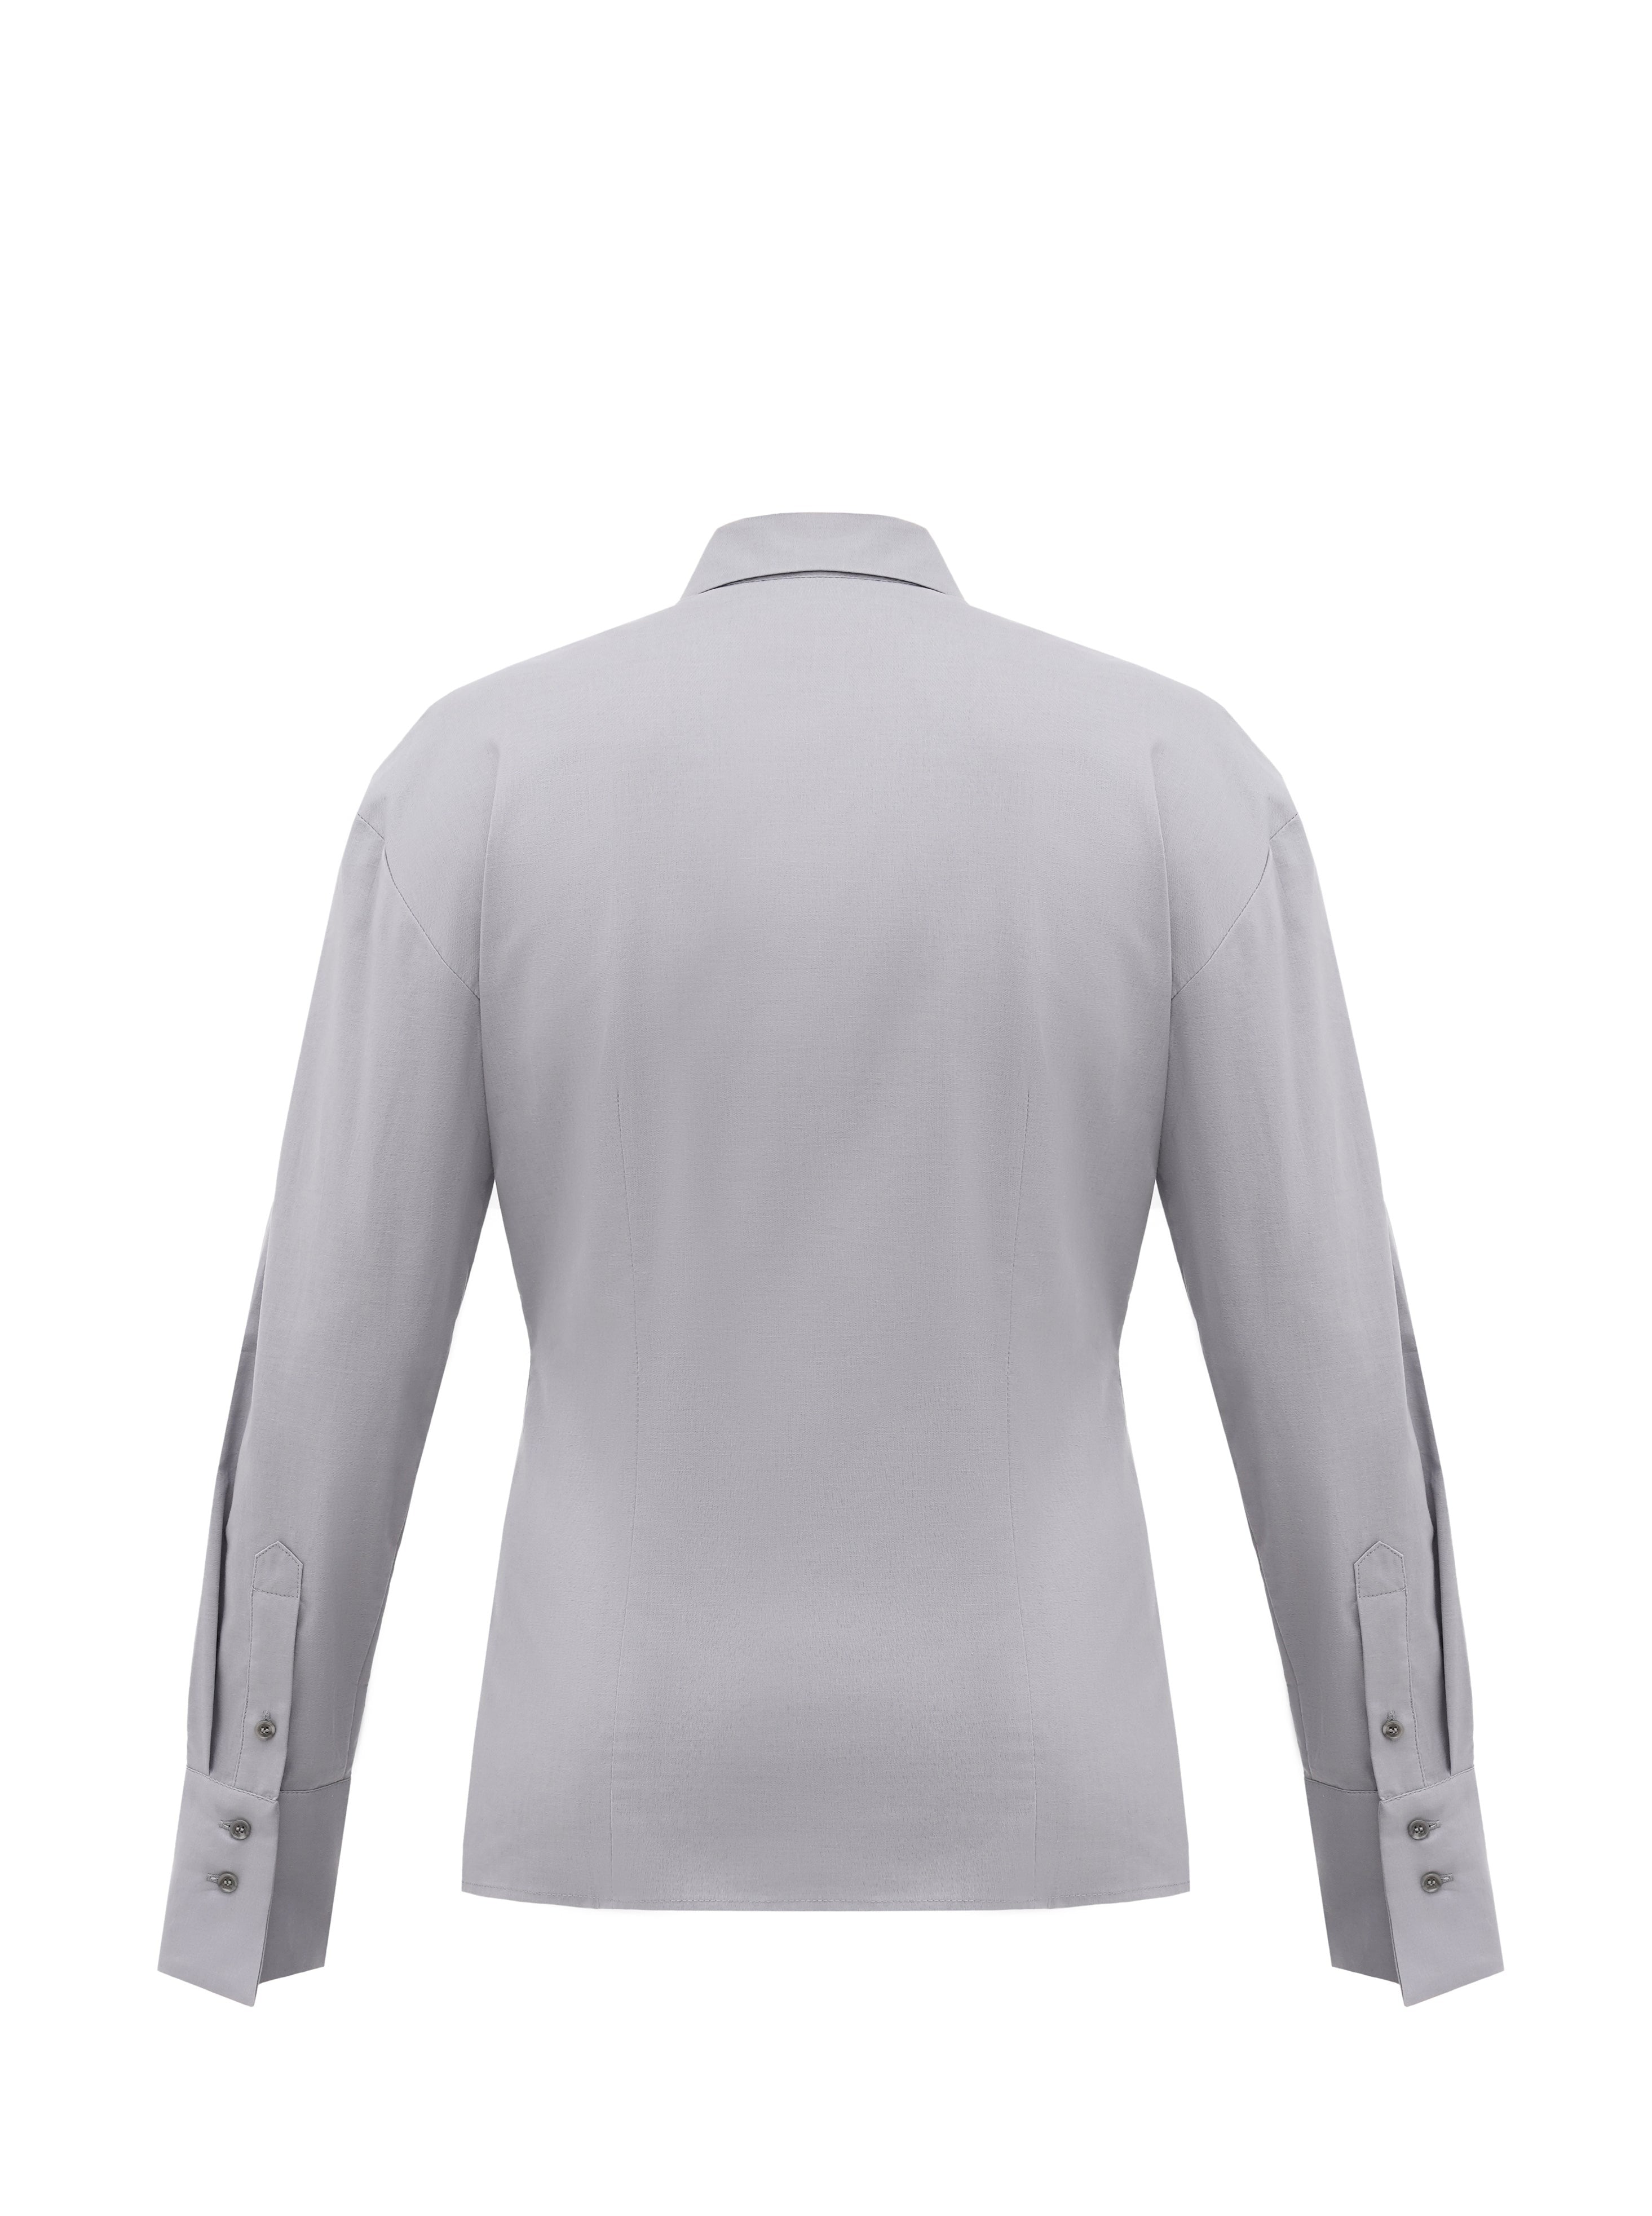 A back of an organic cotton shirt in grey color, fitted silhouette 